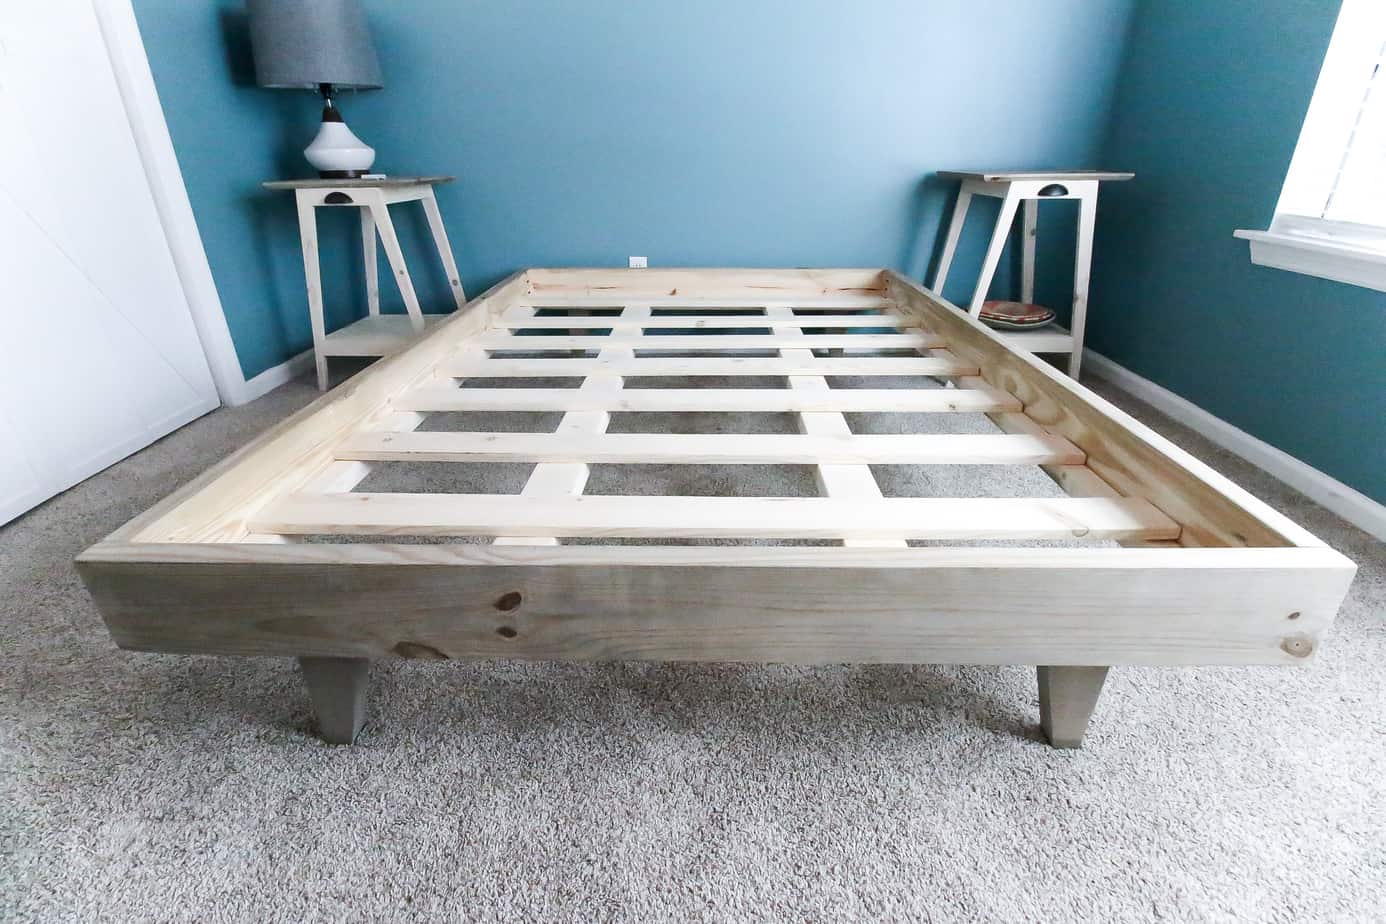 How To Build A Platform Bed For 50, Free Queen Size Bed Plans